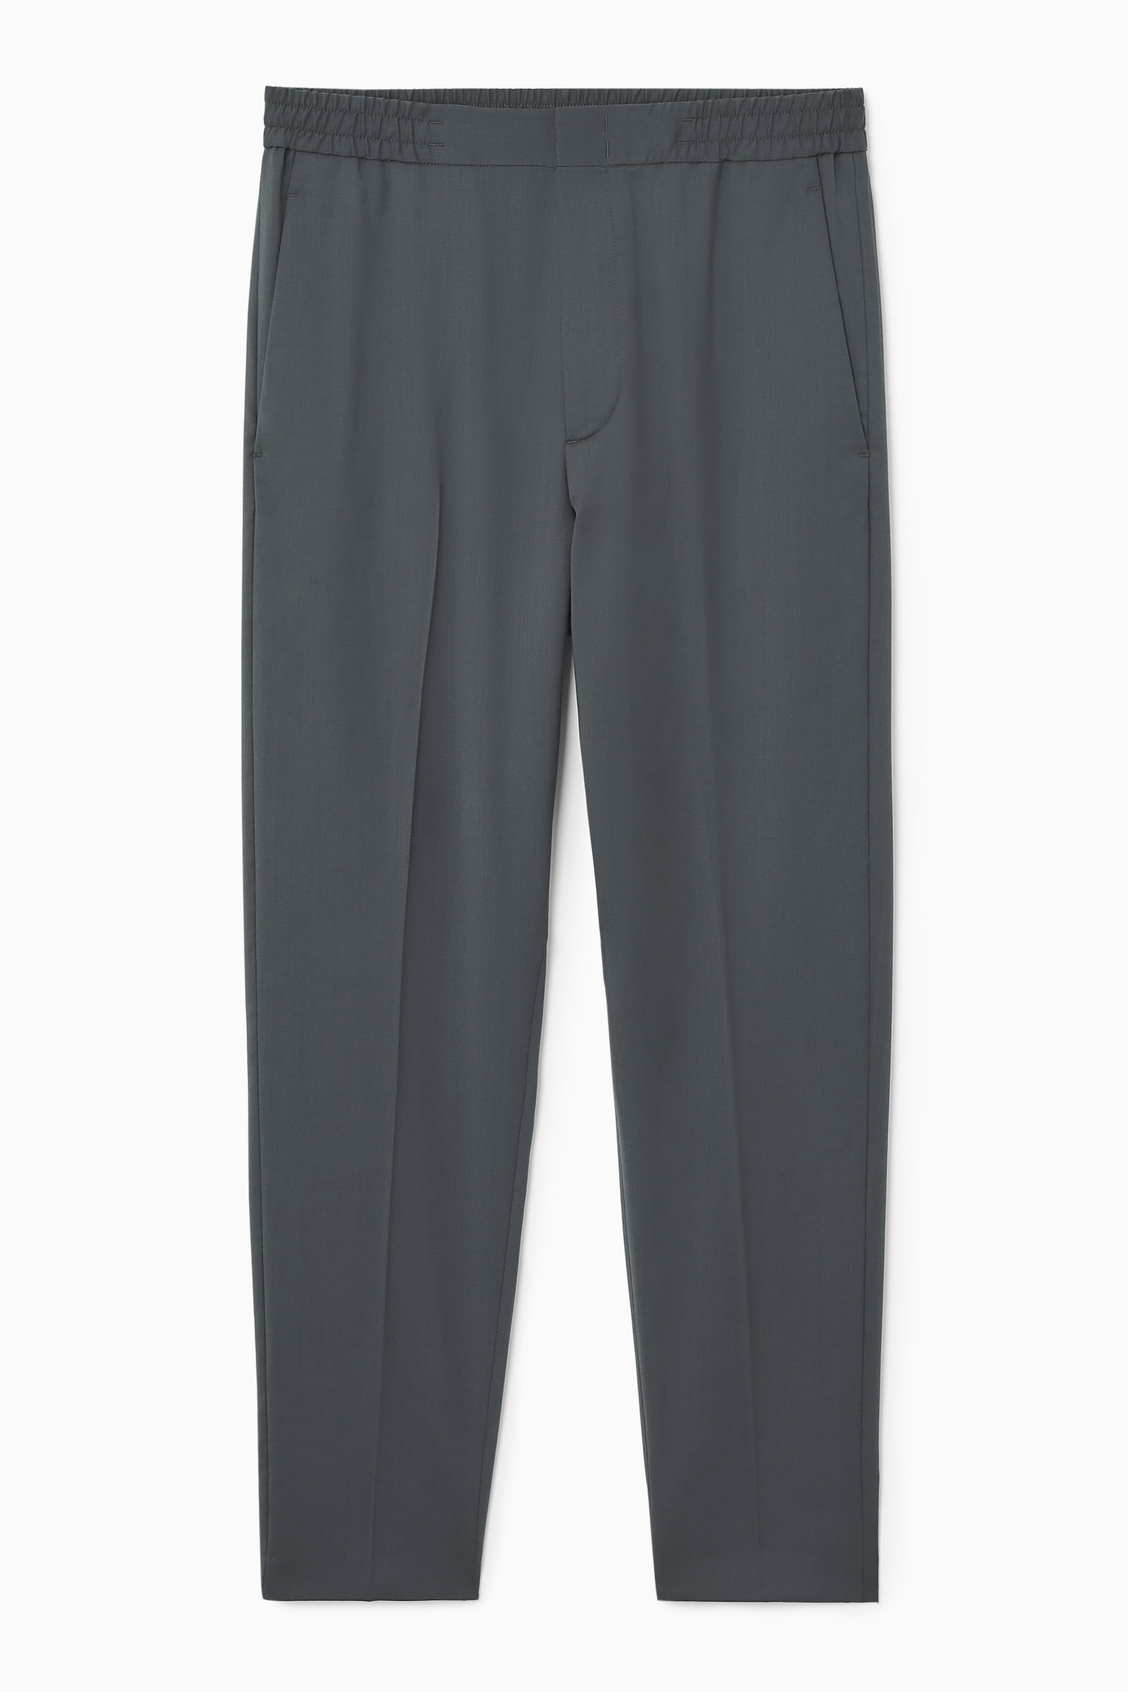 Buy High-waisted twill trousers Online in Dubai & the UAE